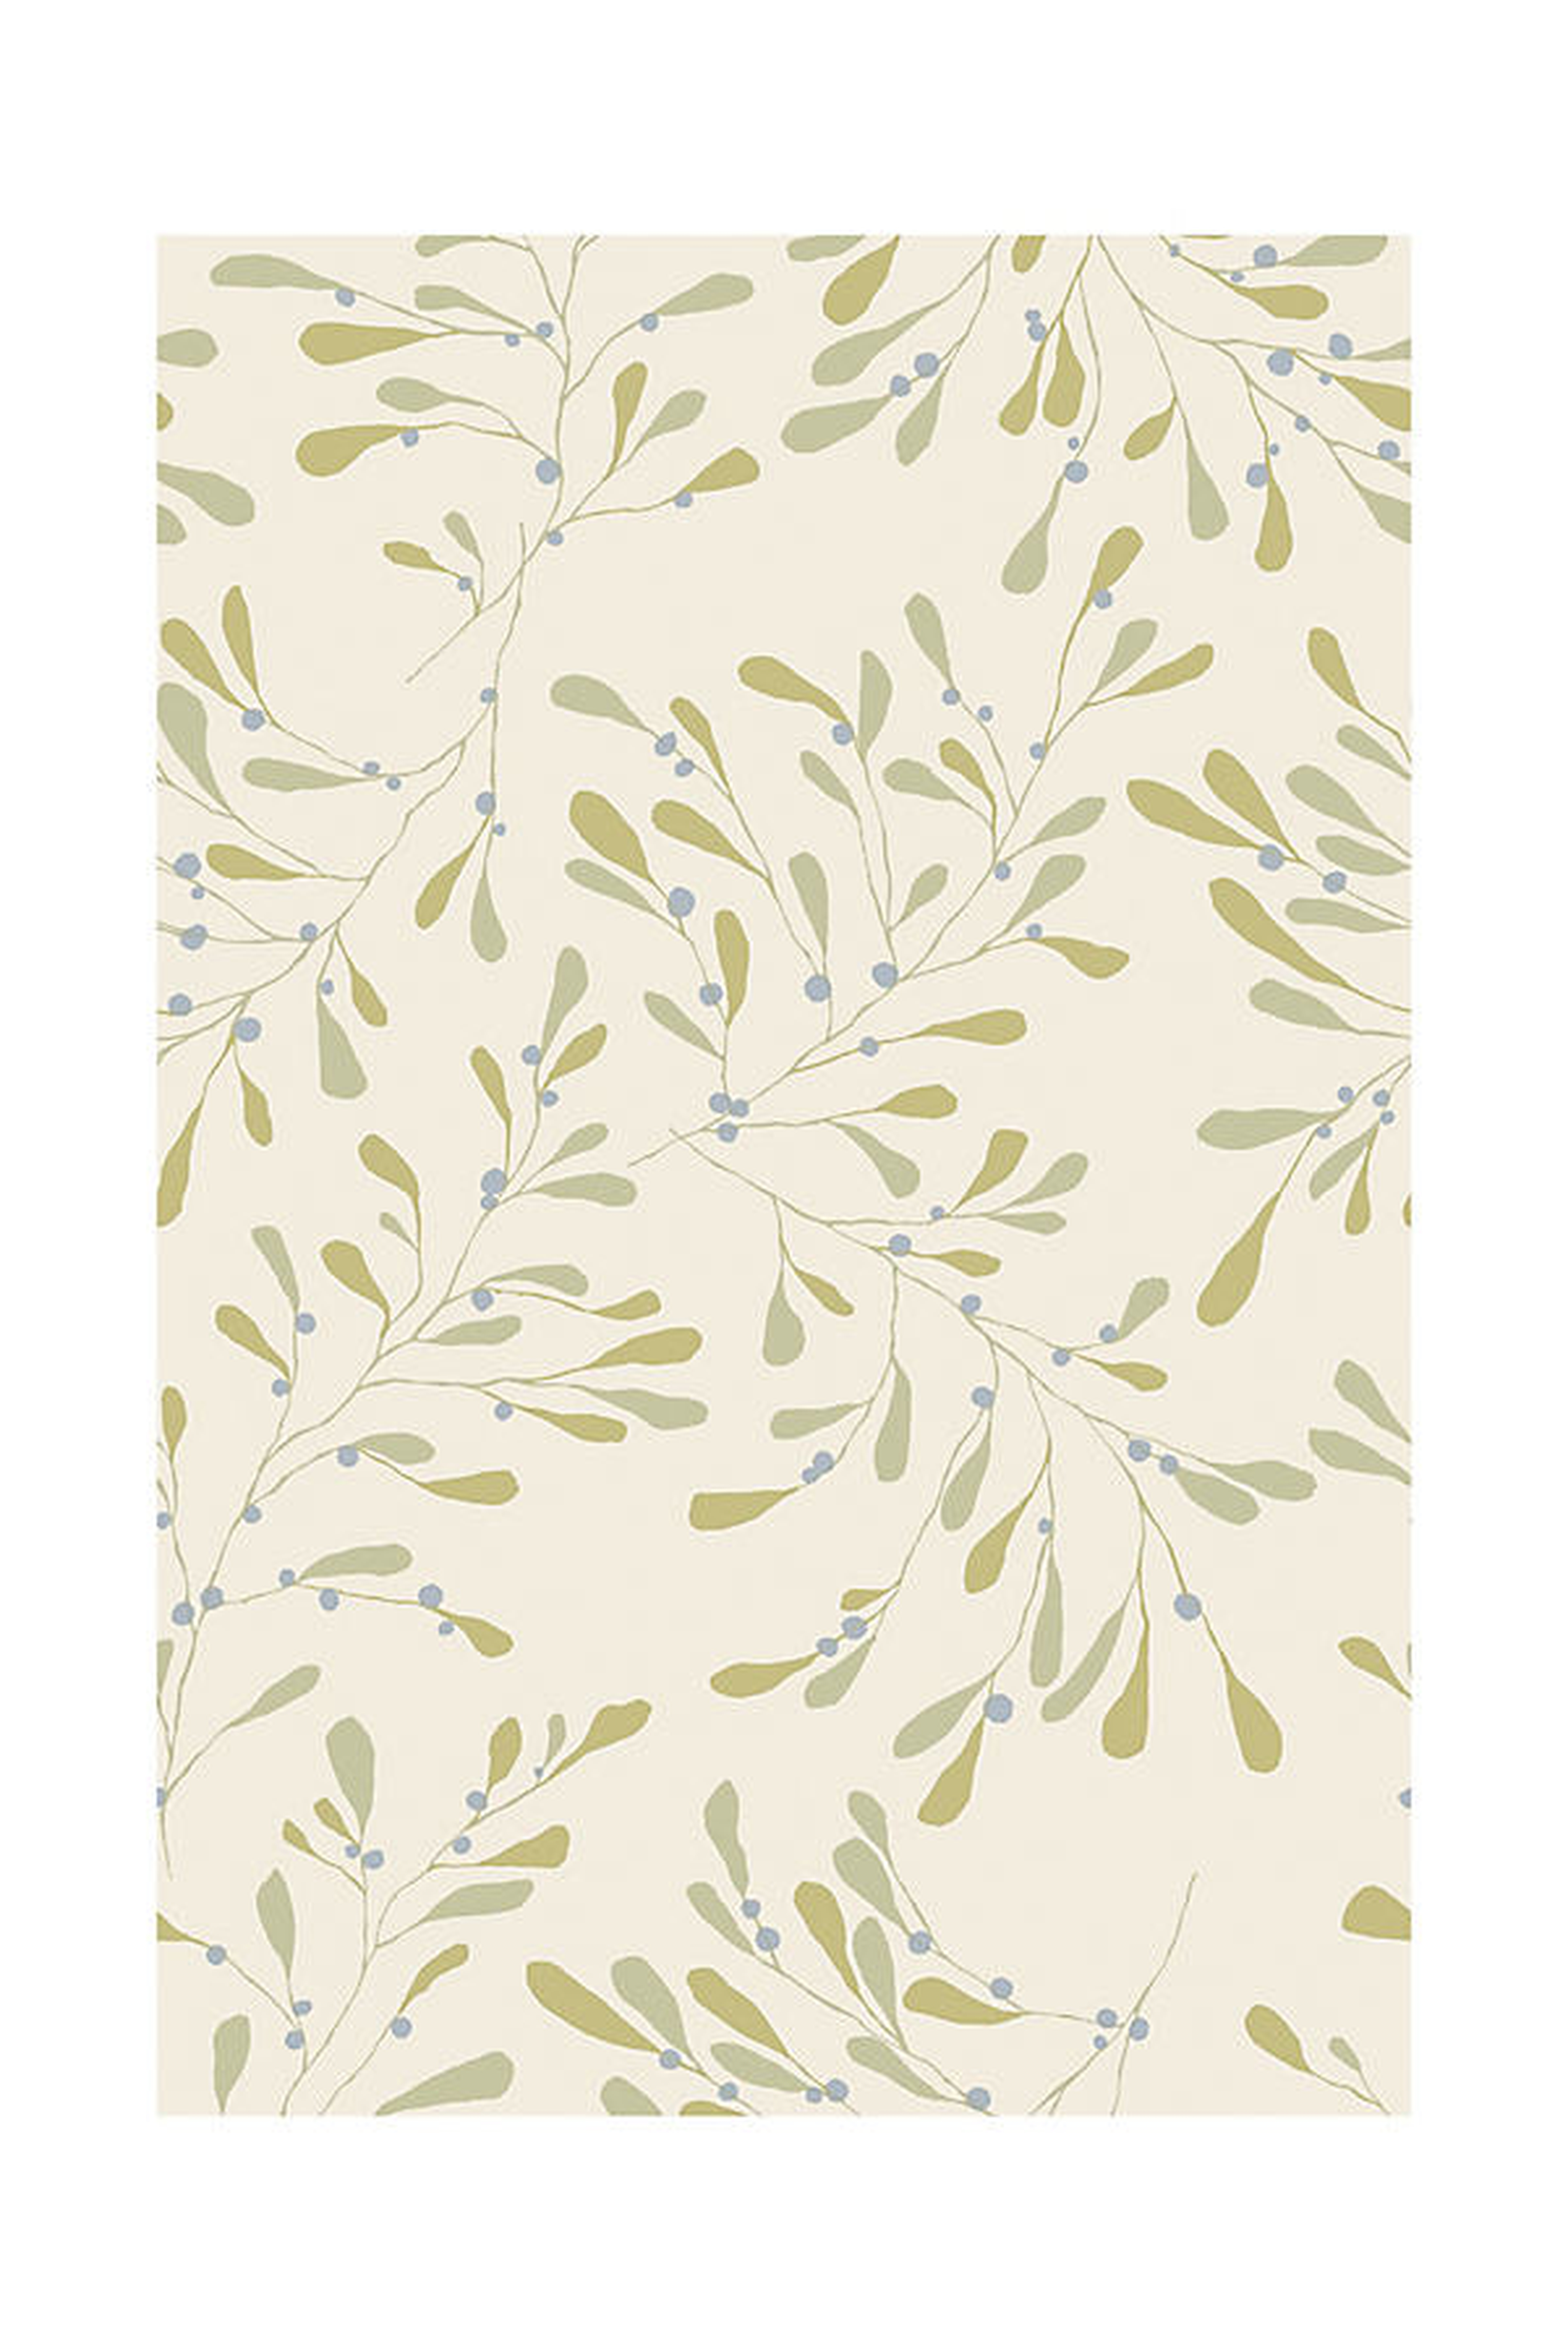 Branches Wallpaper By Susan Hable for Soicher Marin in Blue - Anthropologie